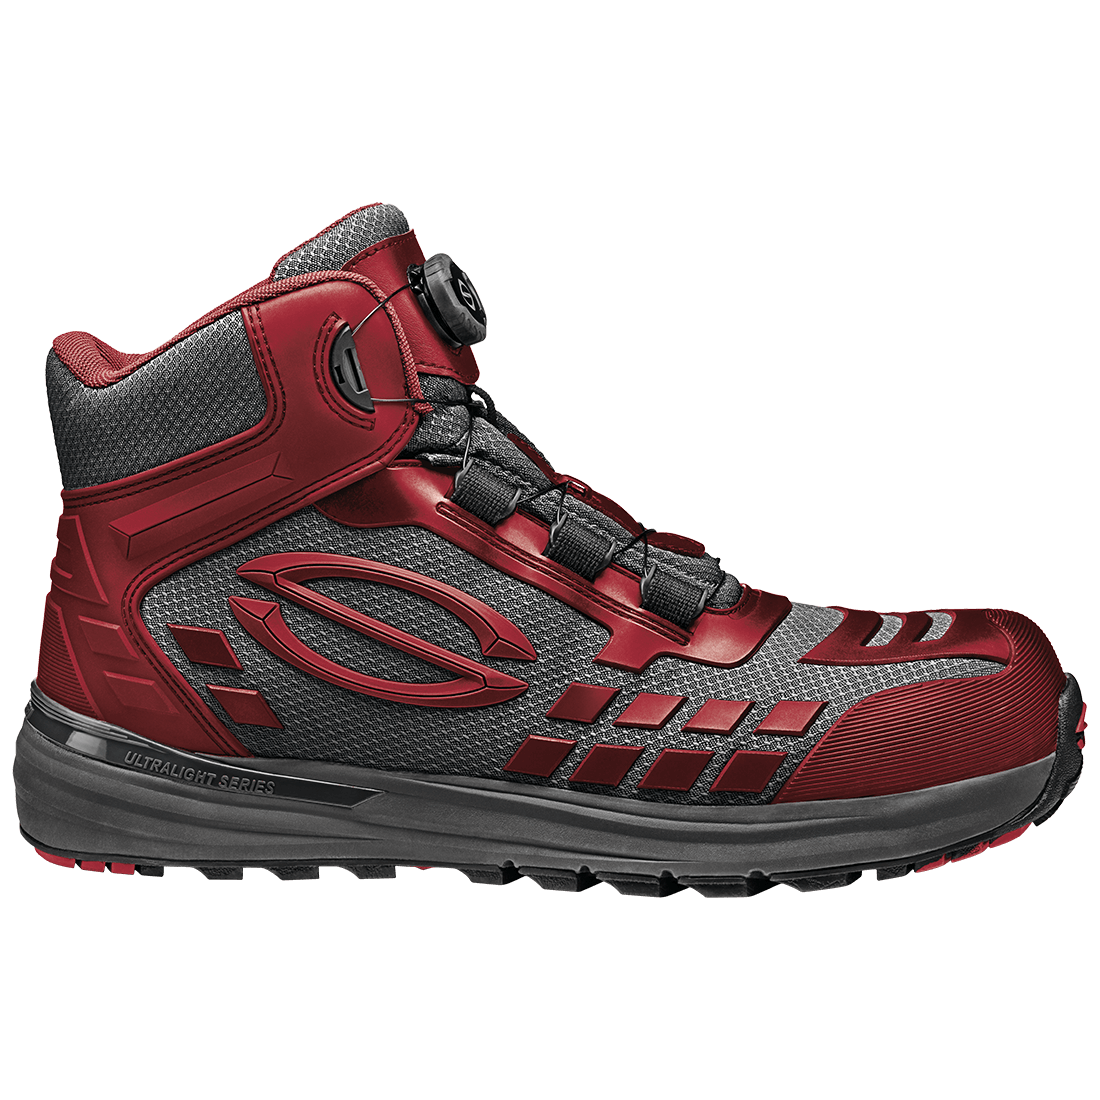 ULTRALIGHT RED ARMOUR SHOE